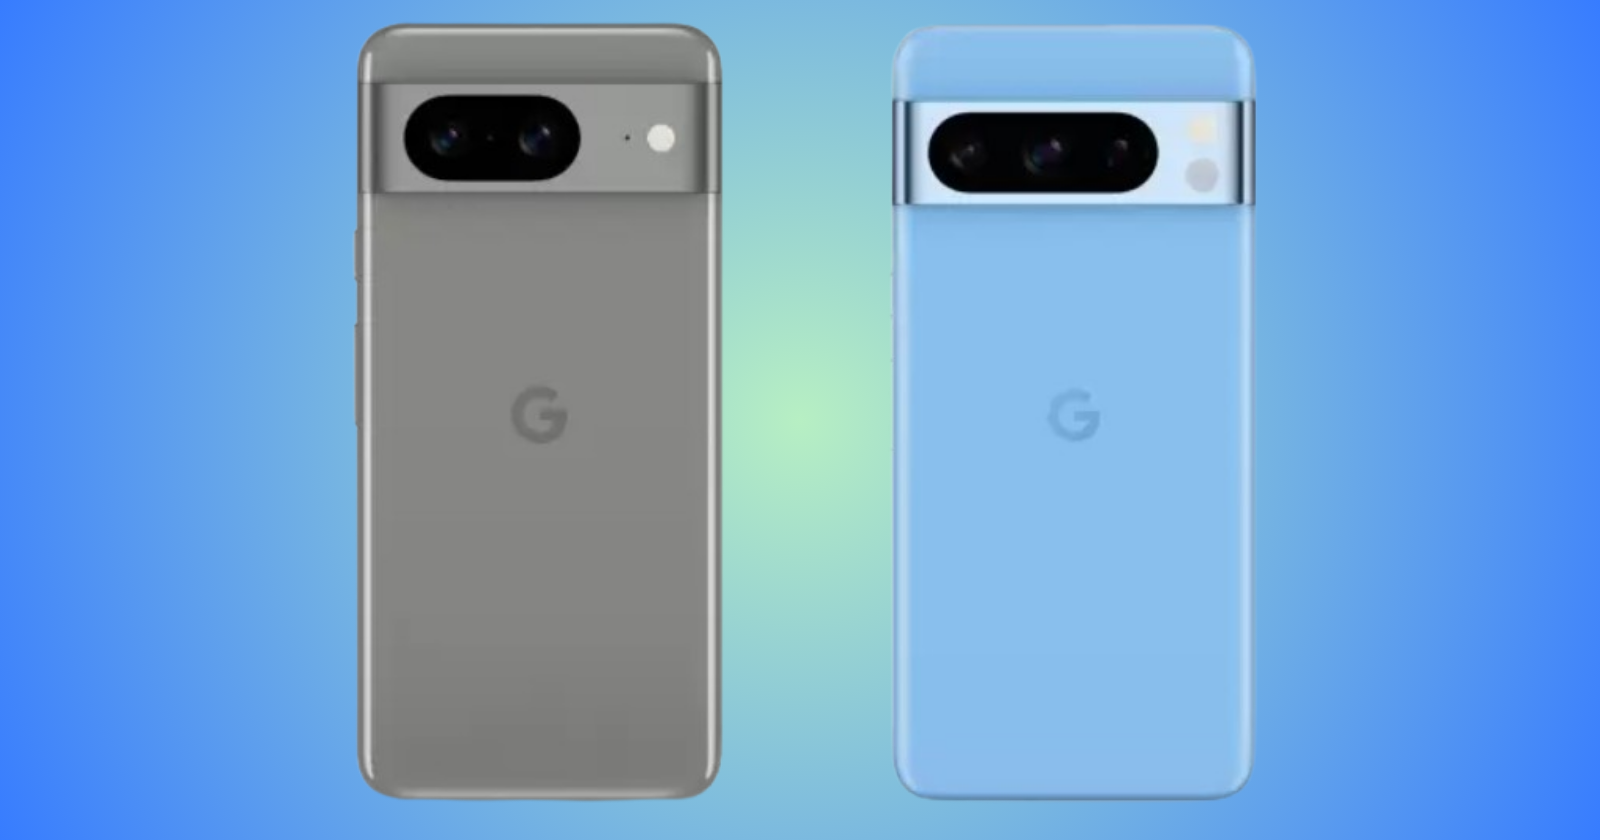 Google Pixel 9 and Pixel 9 Pro: All rumors and speculations so far